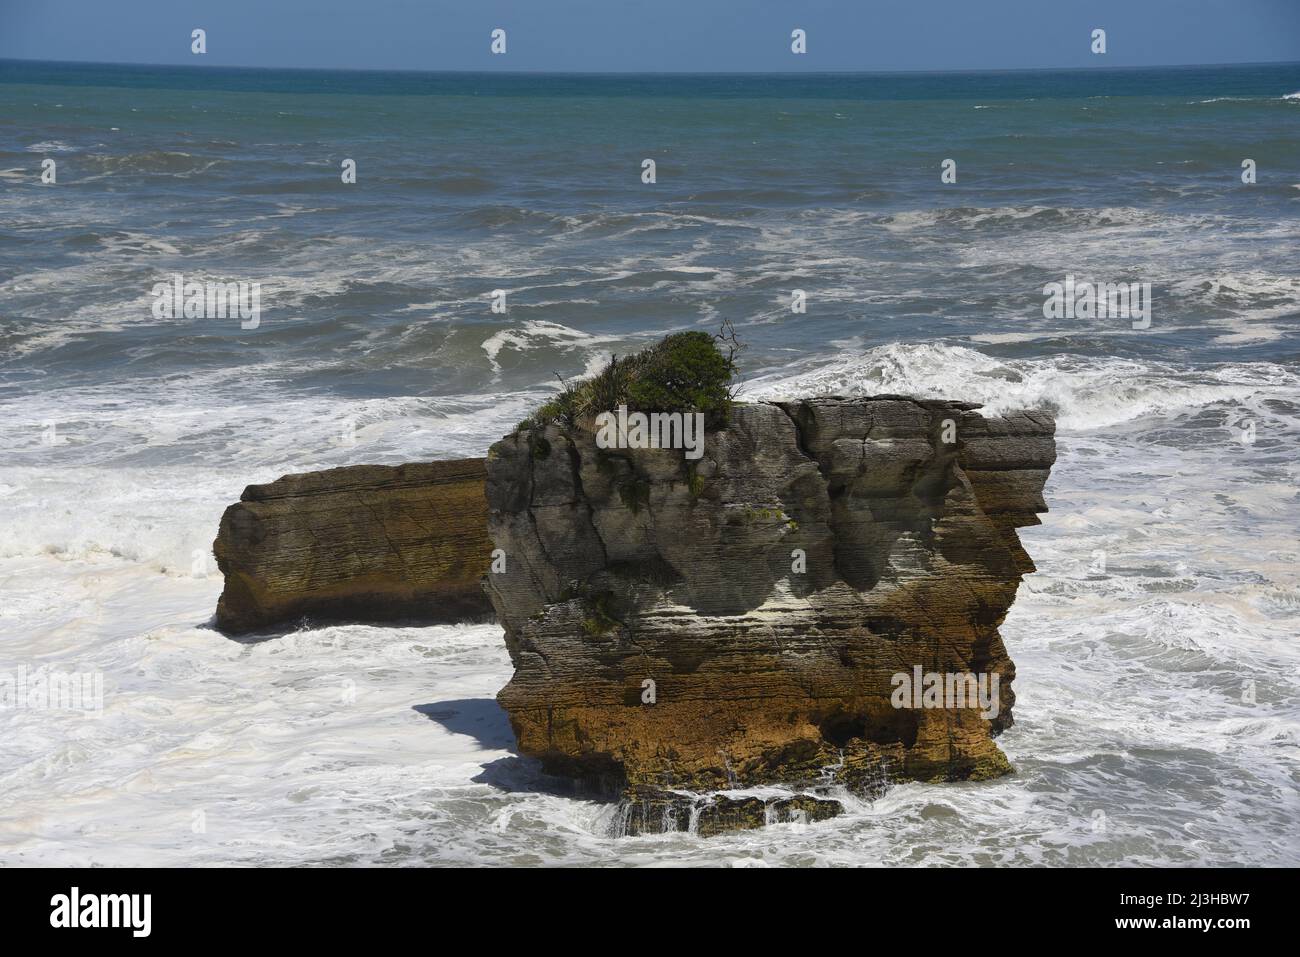 A panoramic view of the foamy ocean, surf and sea stacks just off the beach at the popular Punakaiki Pancake Rocks on the South island of New Zealand. Stock Photo